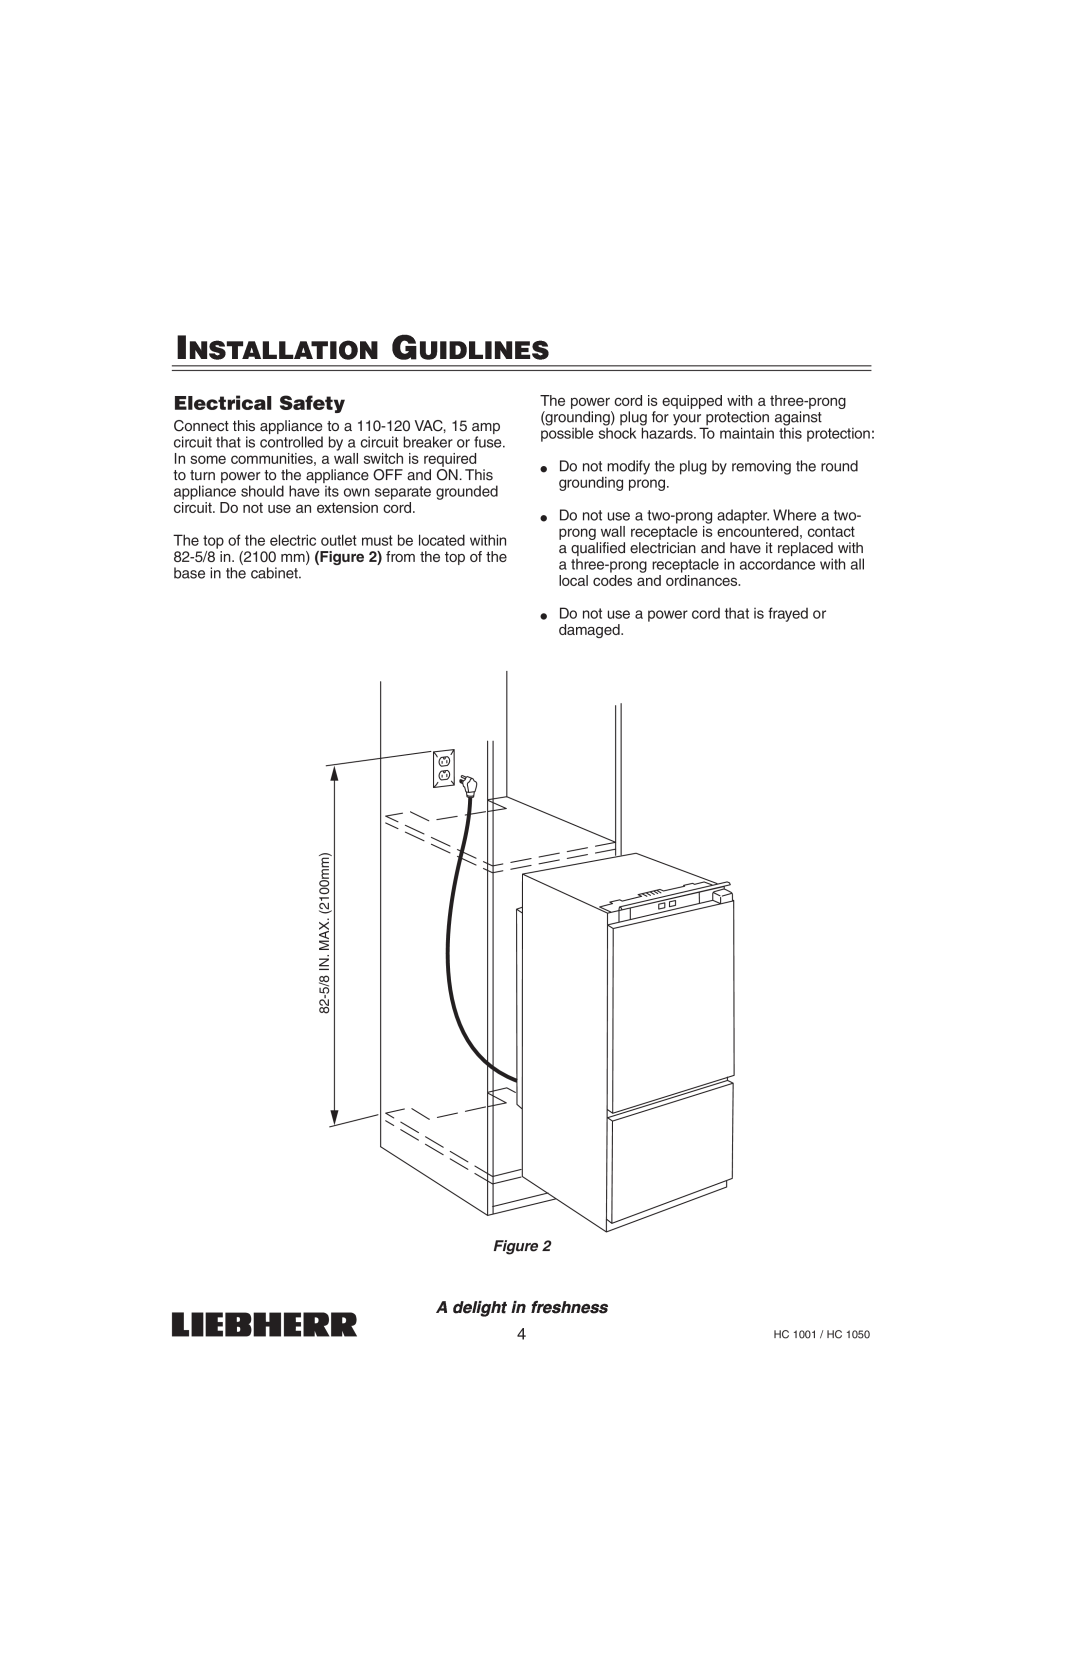 Liebherr HC1001, HC1050 installation manual Installation Guidlines, Electrical Safety, A delight in freshness 